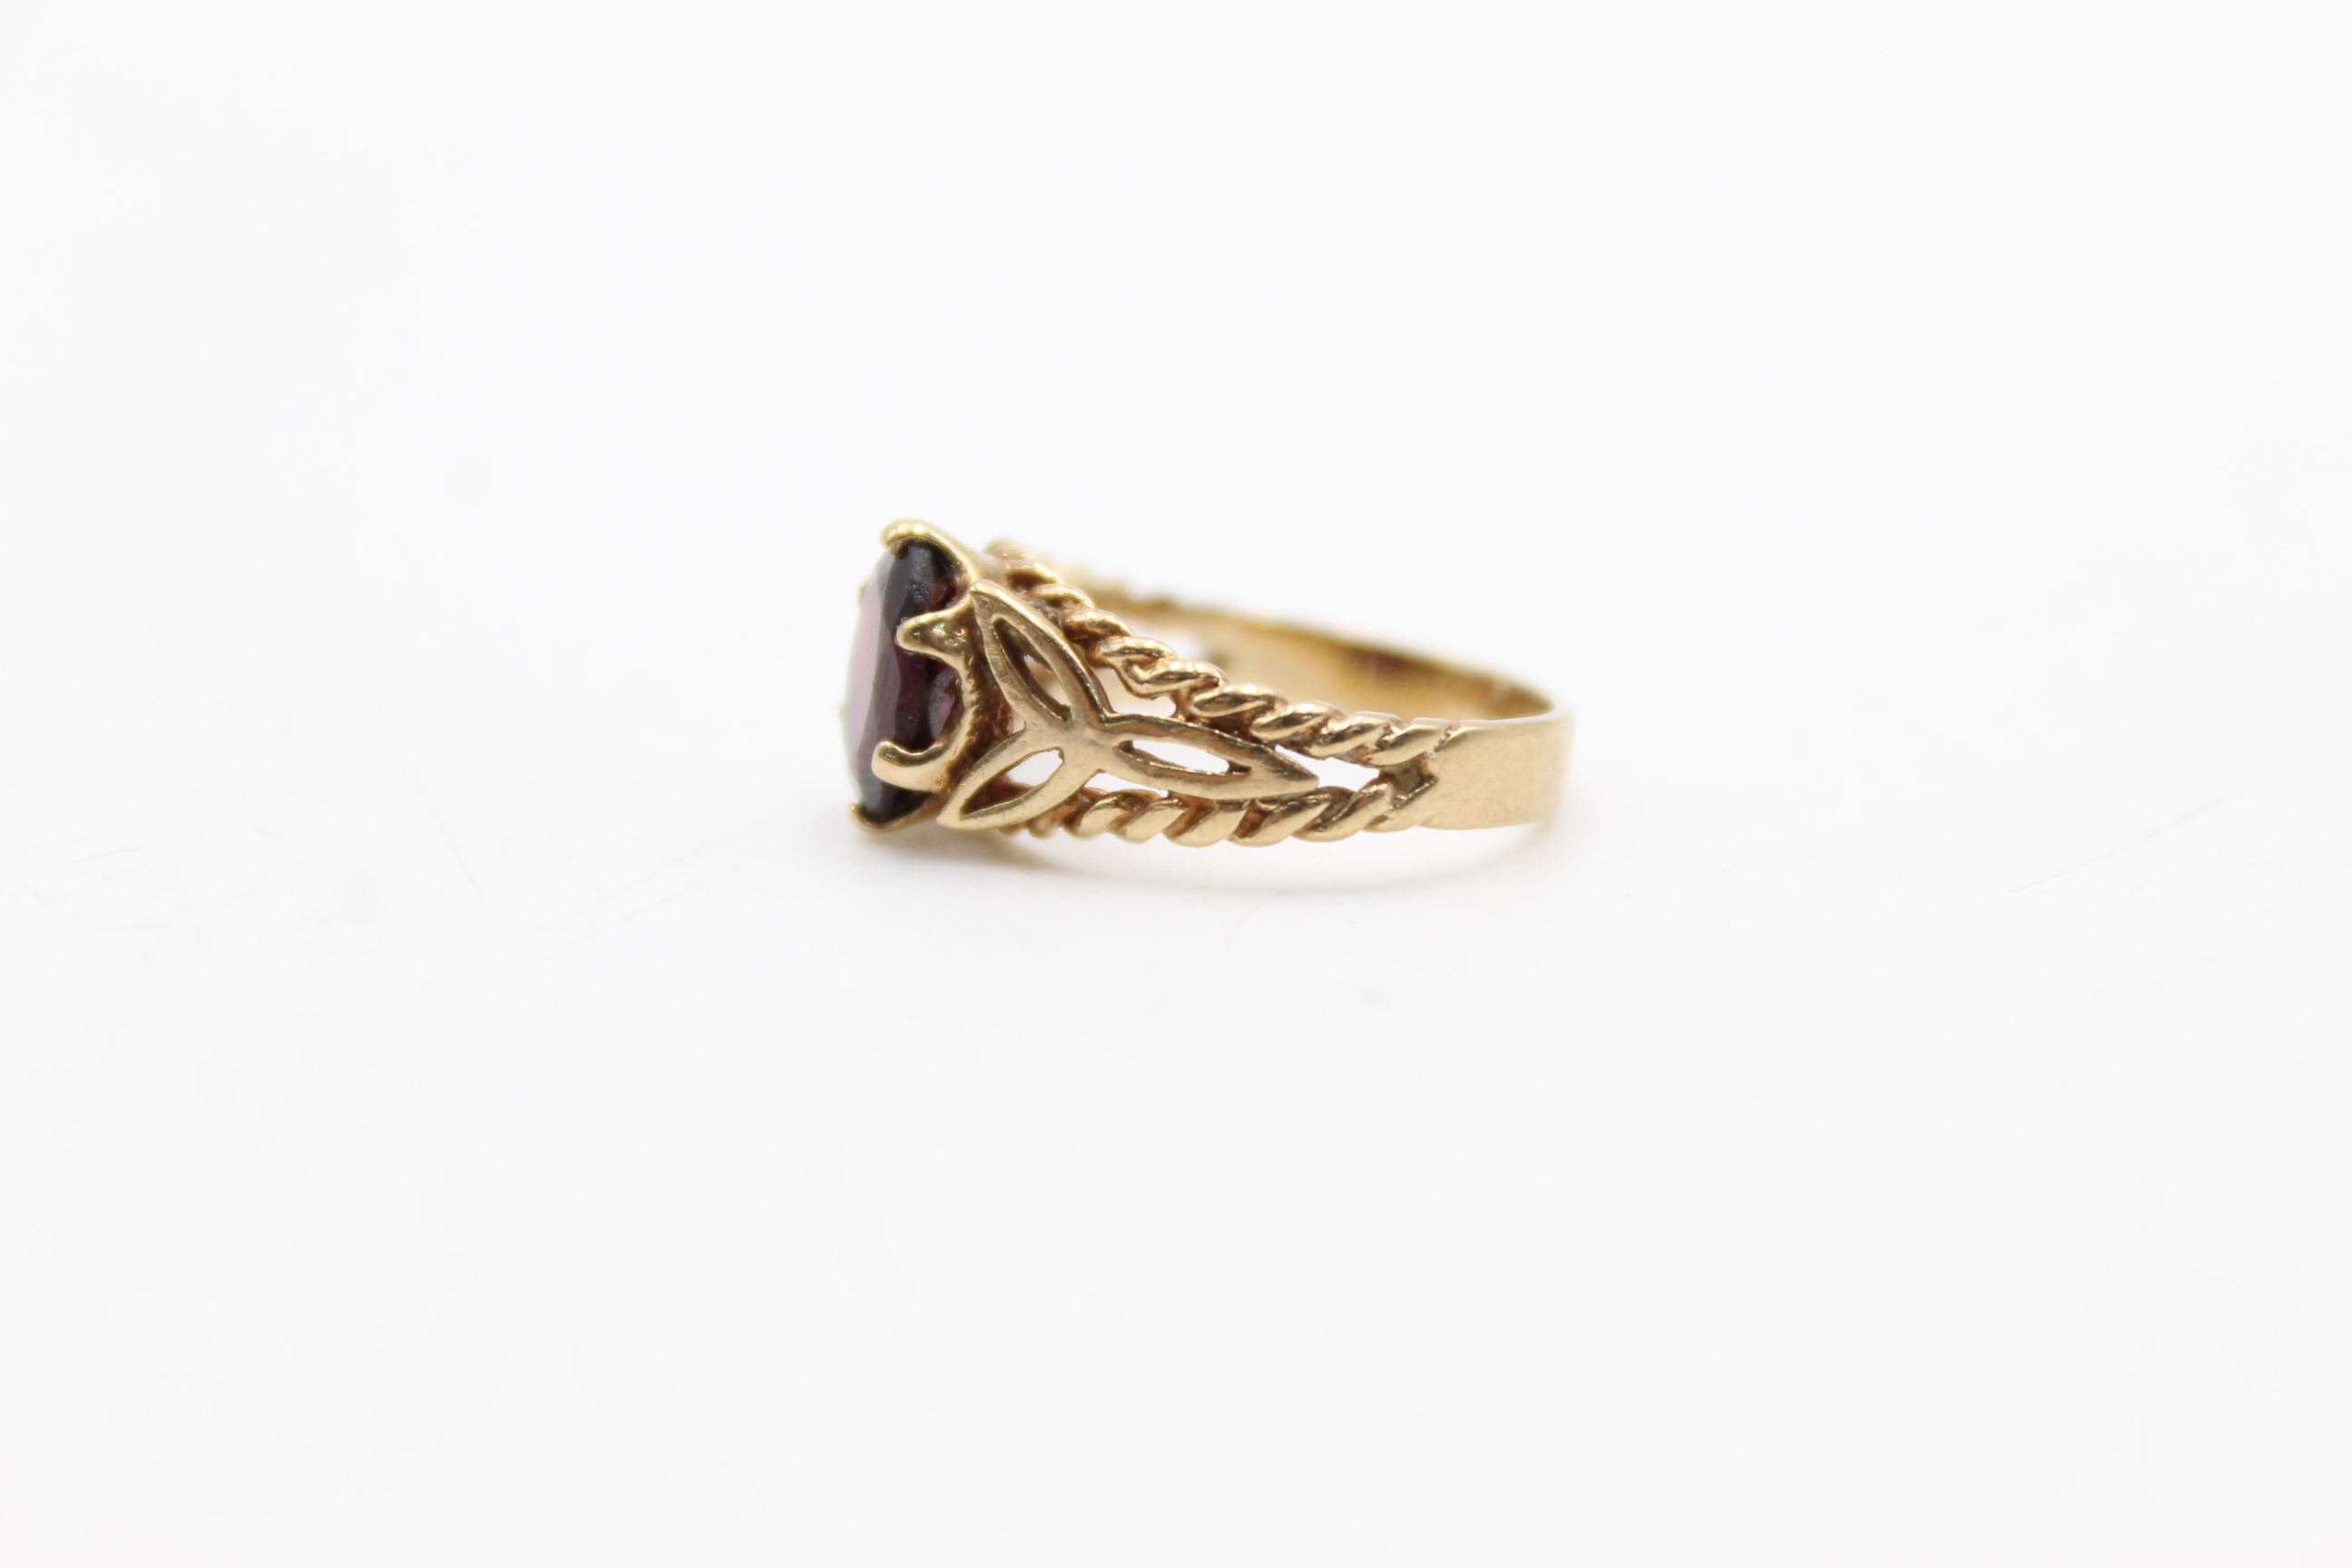 9ct gold garnet solitaire cutwork band ring (2.3g) - Image 3 of 6